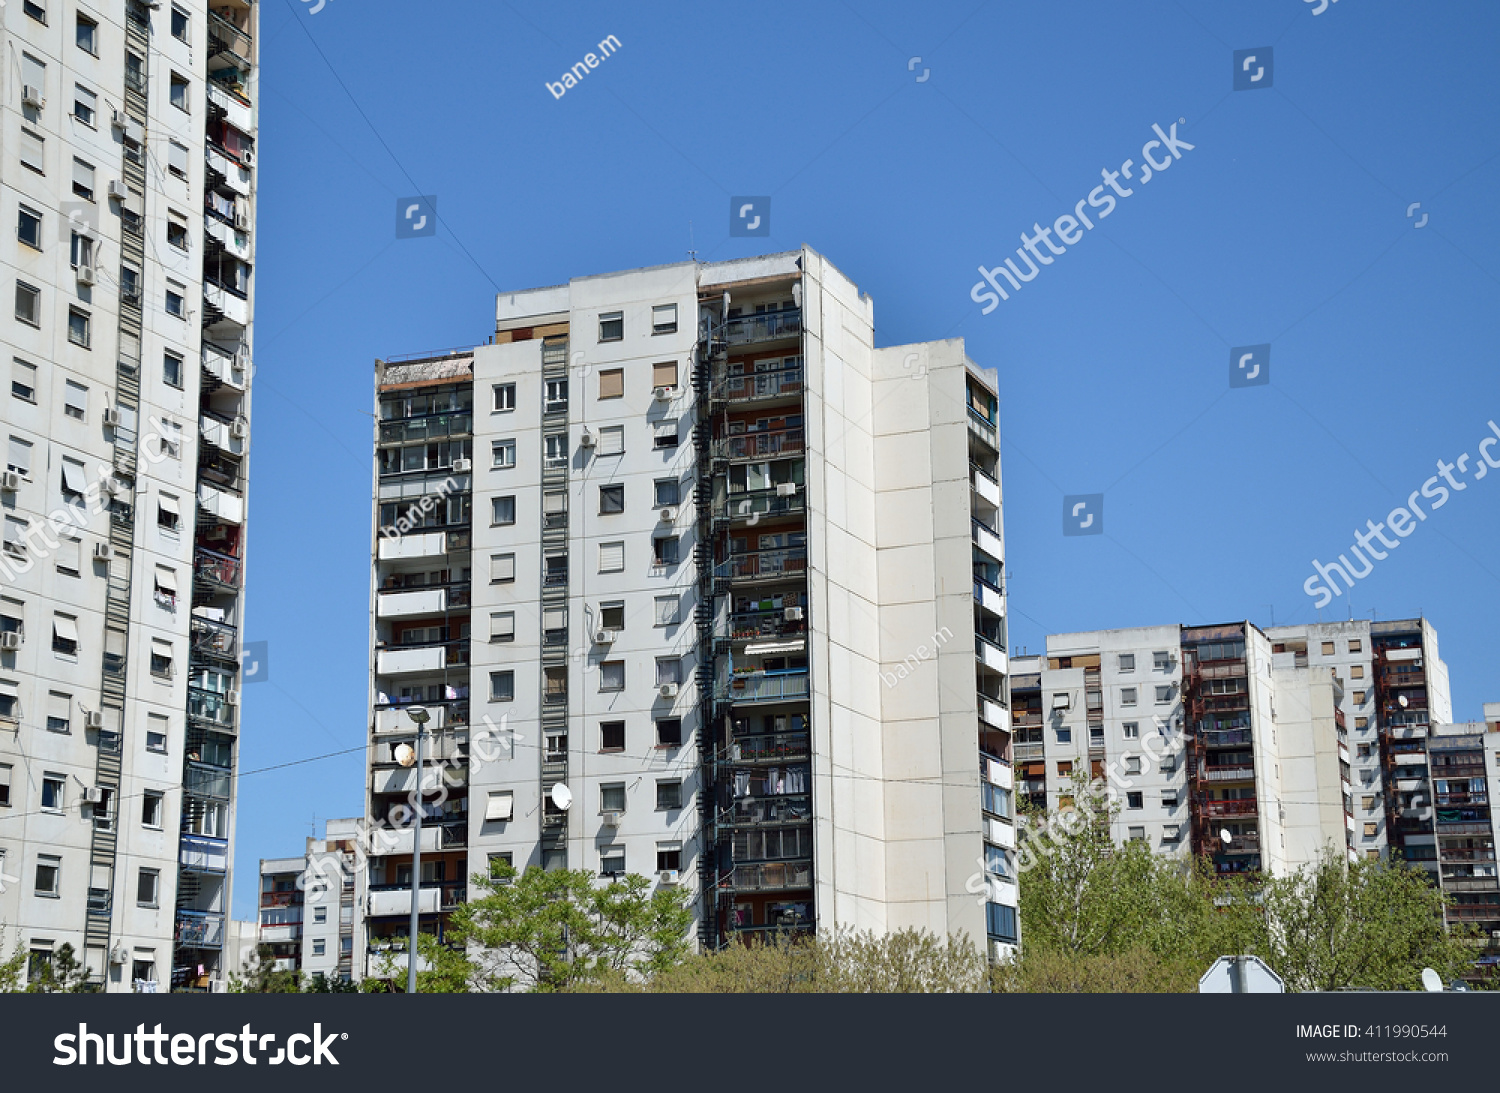 Line of residential buildings under clear spring sky #411990544